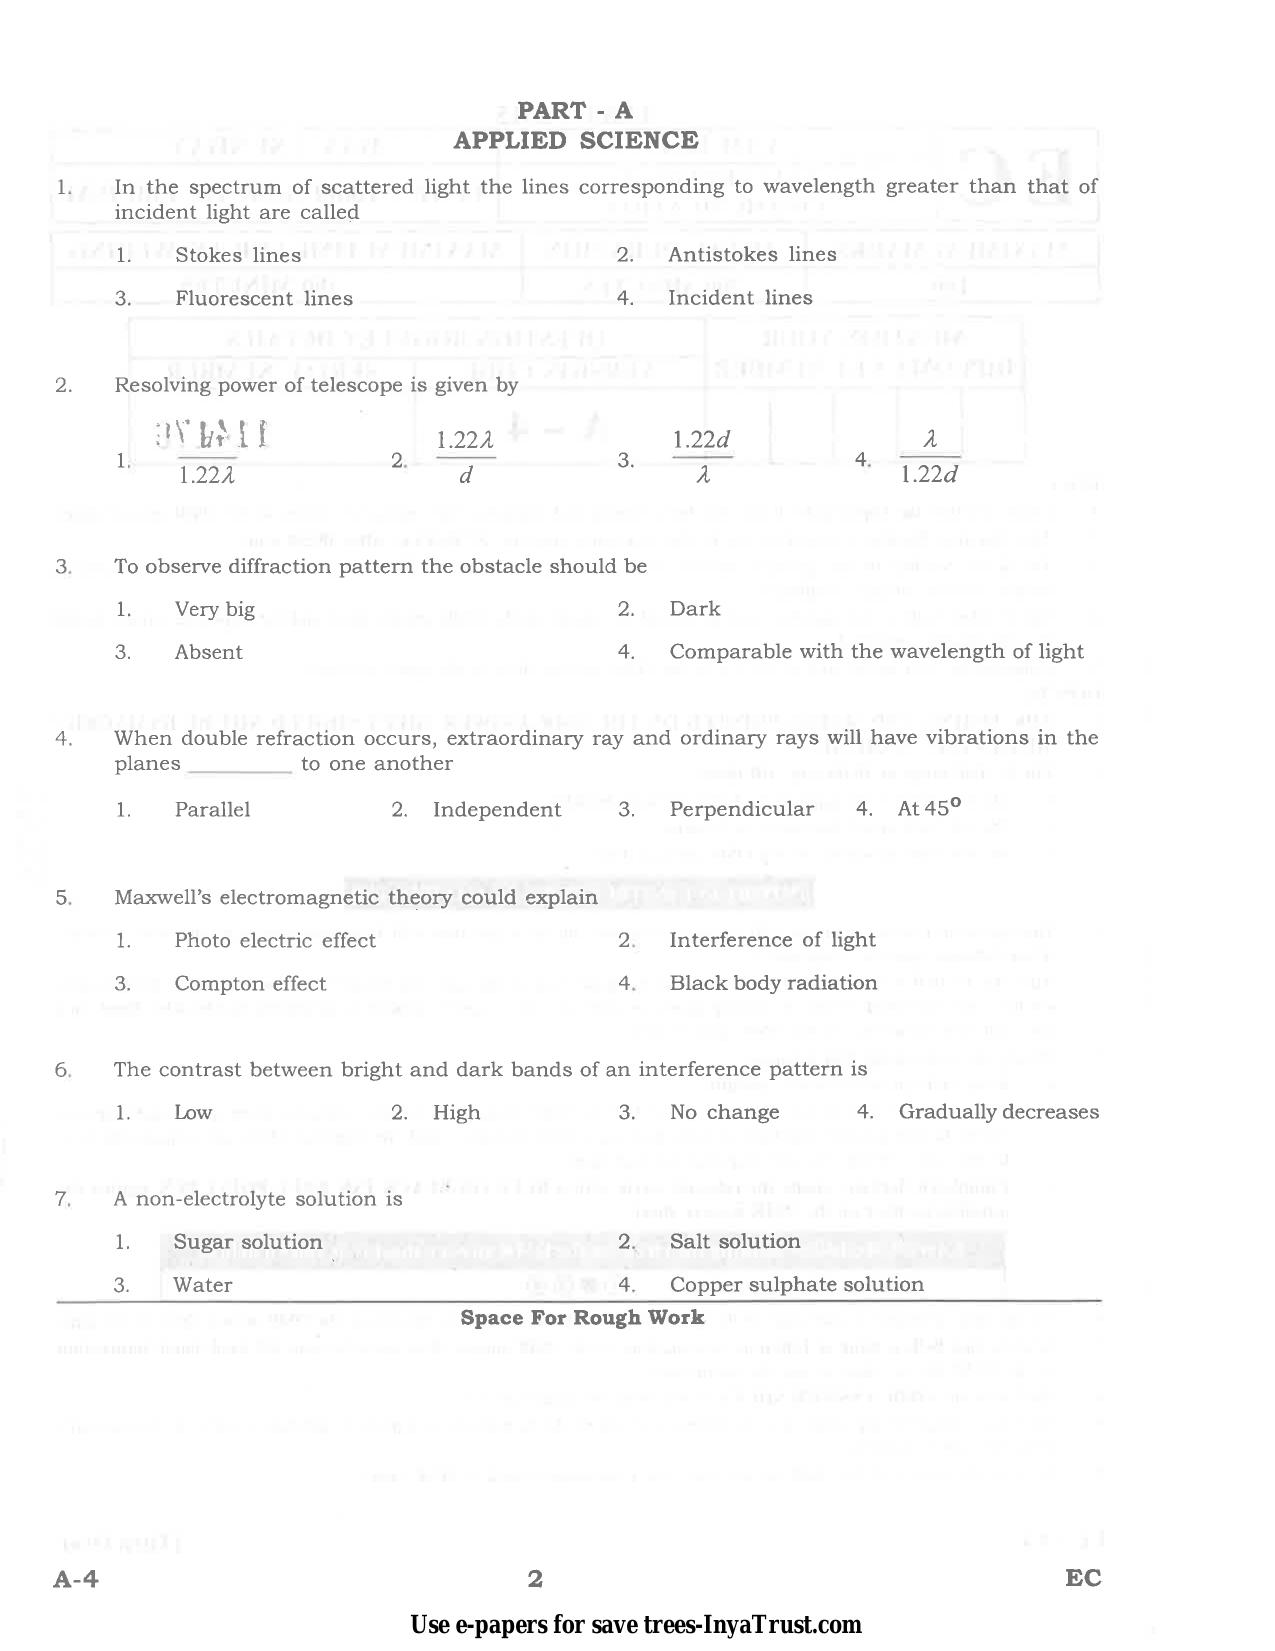 Karnataka Diploma CET- 2015 Electronics and Communication Engineering Question Paper - Page 2